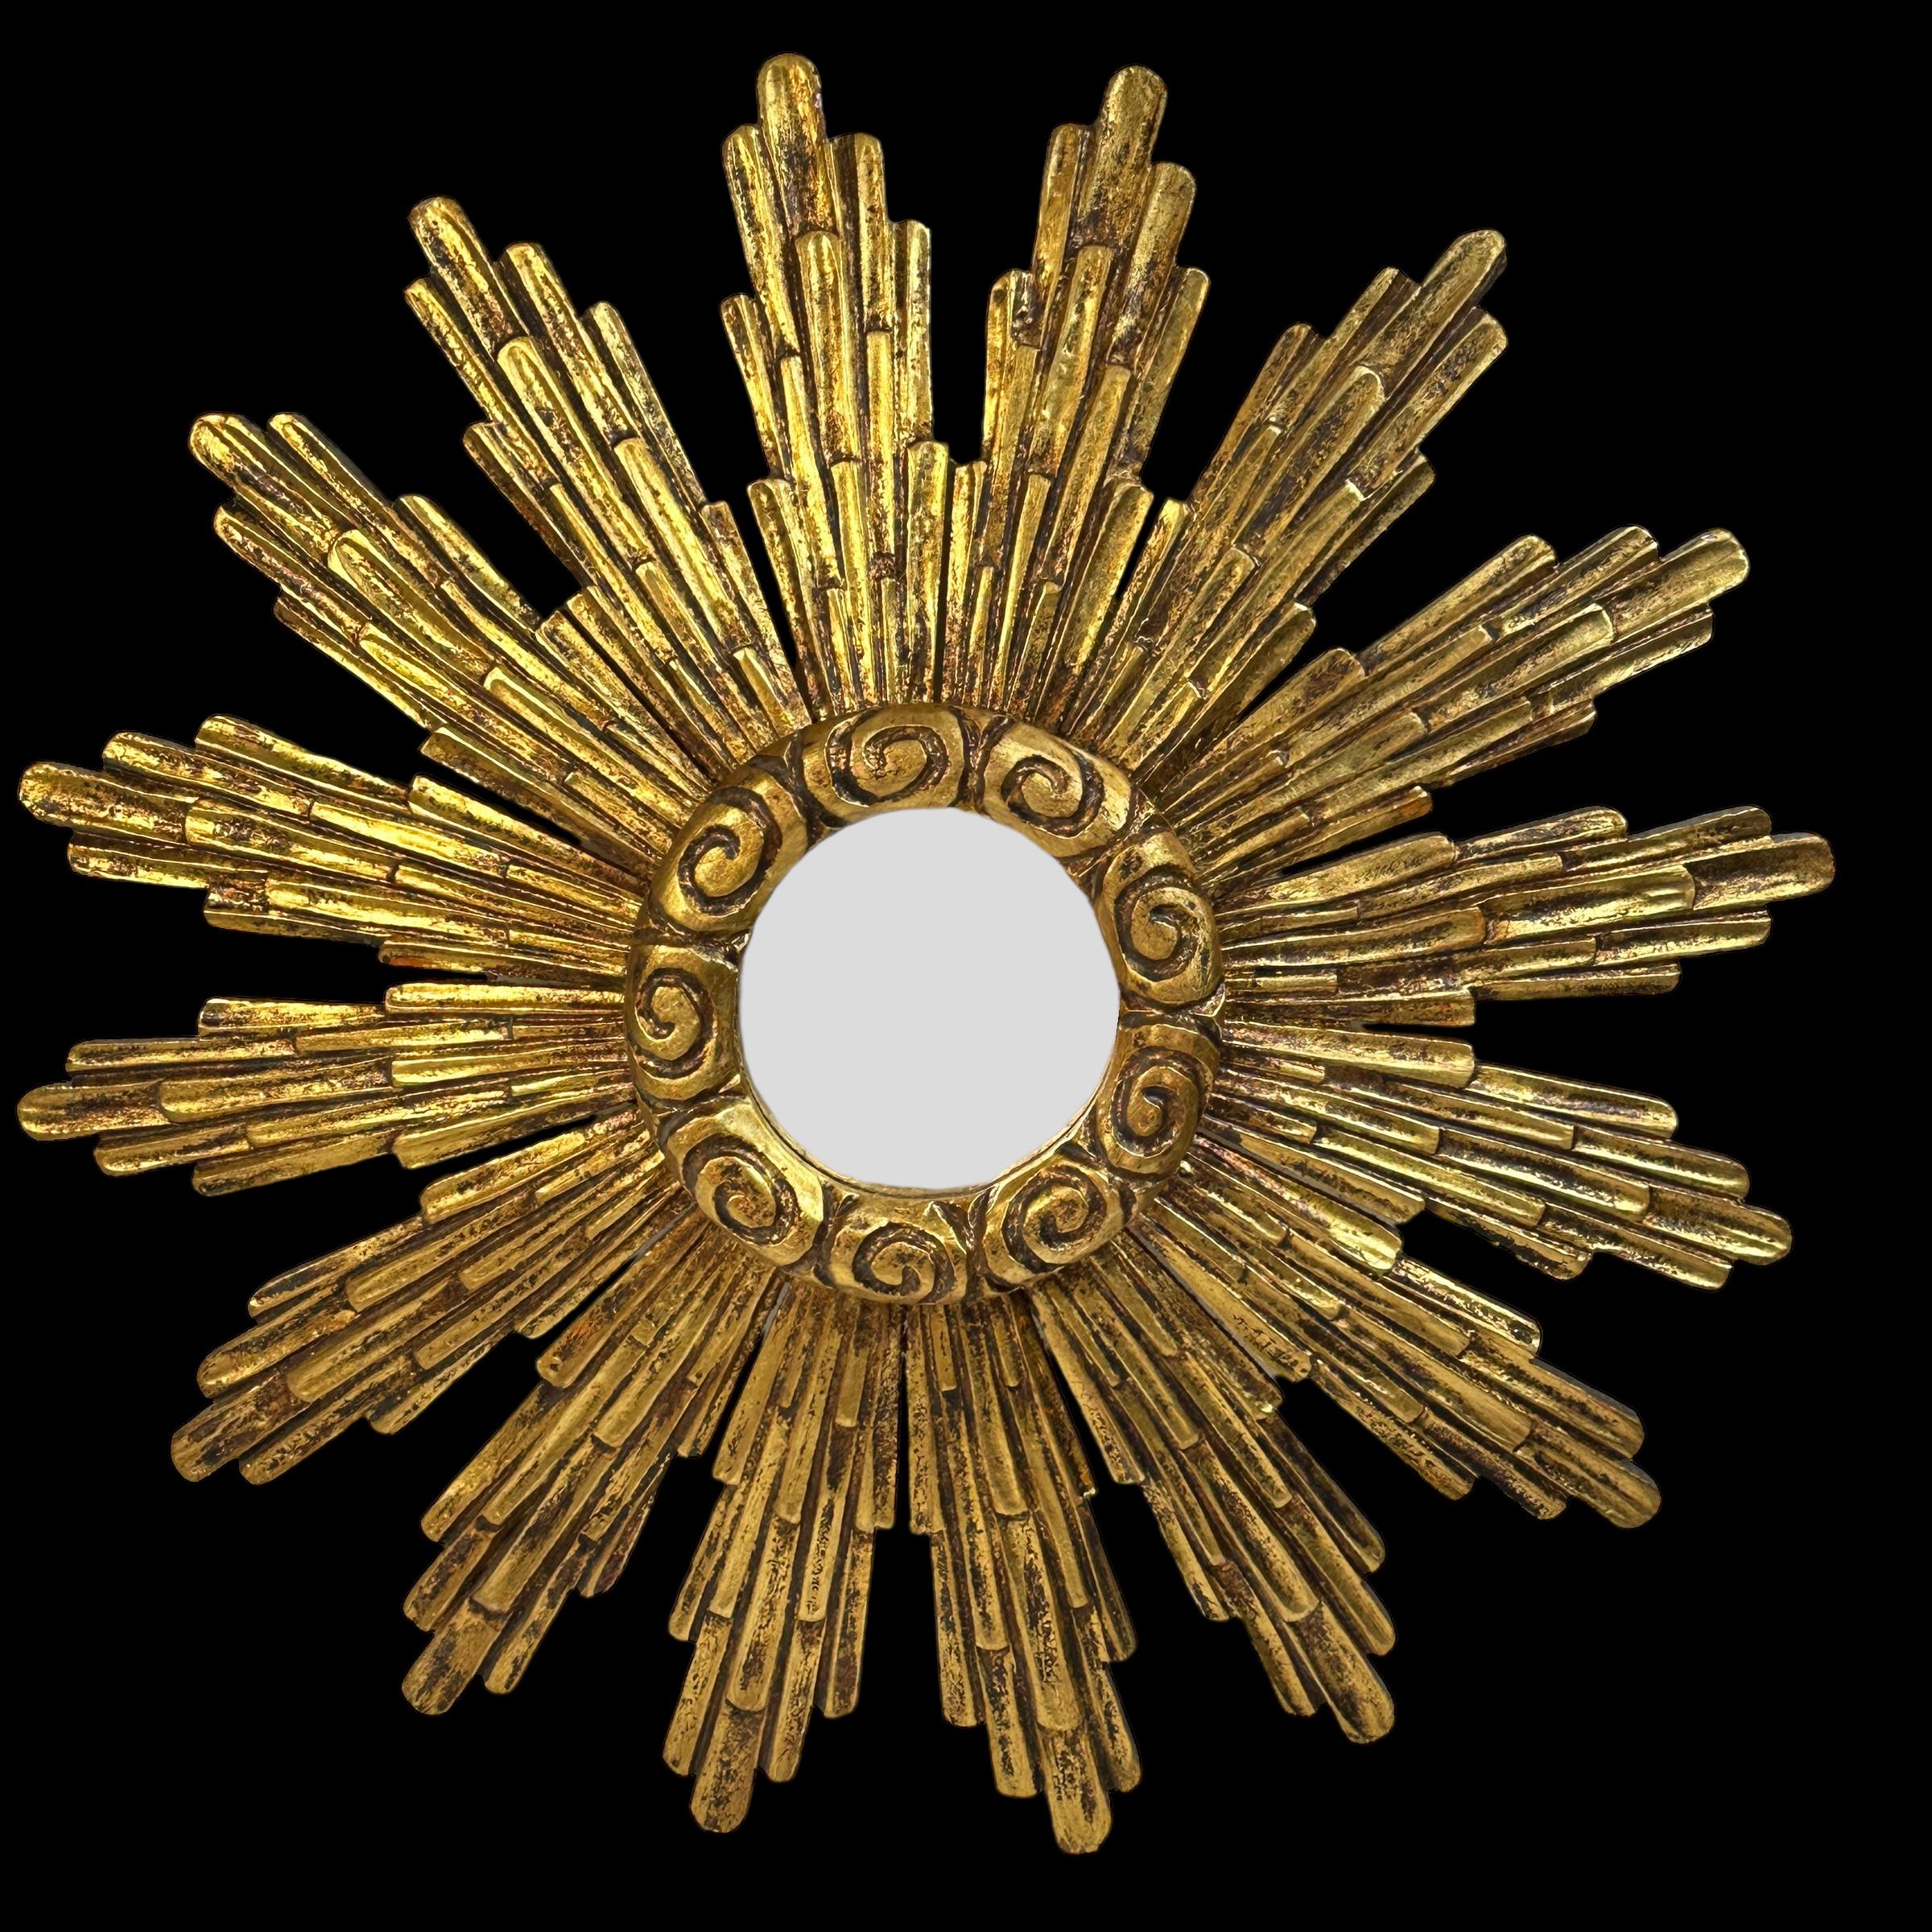 A gorgeous starburst sunburst mirror. Made of gilded wood. No chips, no cracks, no repairs. It measures approximate: 23.5